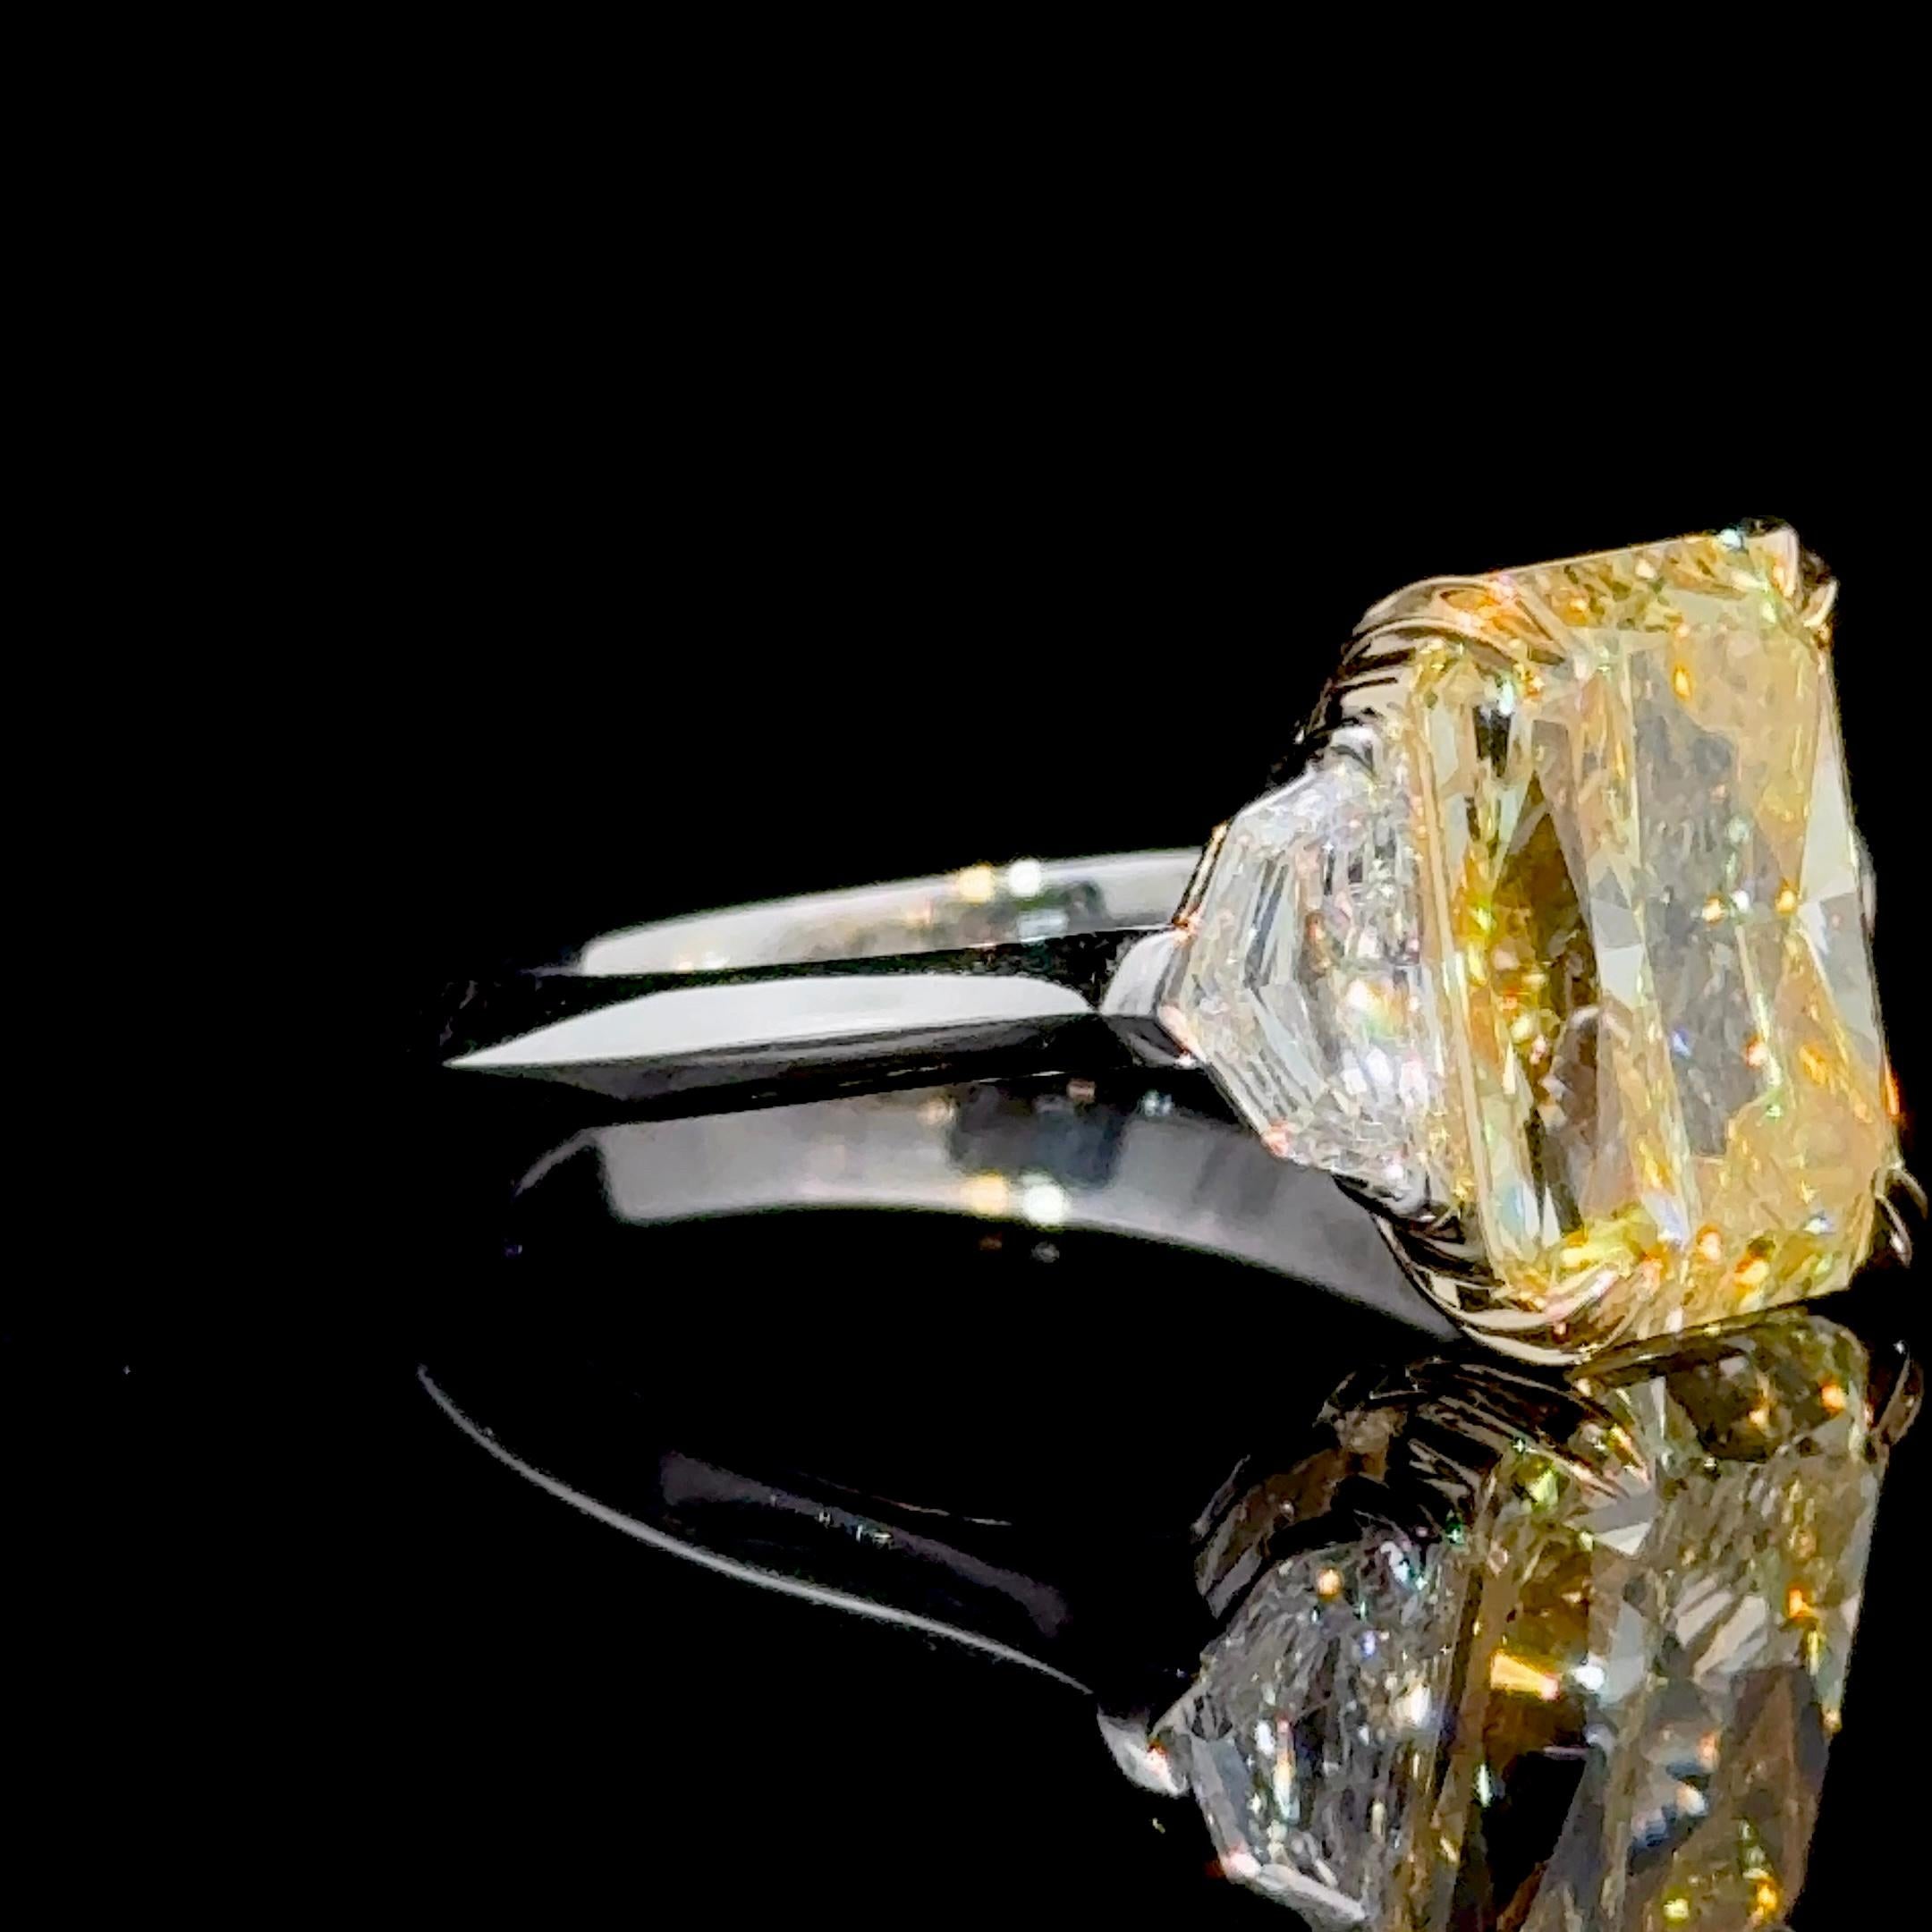 GIA Certified 5.13 Carat Rectangular Radiant Cut Fancy Yellow Three Stone Ring

Our signature Three Stone Ring featuring a top calibre, 5.13 Carat Natural Rectangular Radiant Cut Fancy Yellow Diamond
with GIA specifications to match: VVS2 Clarity,